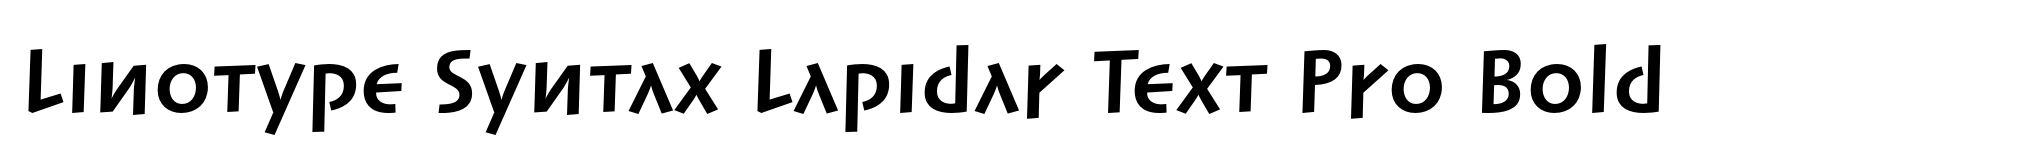 Linotype Syntax Lapidar Text Pro Bold image